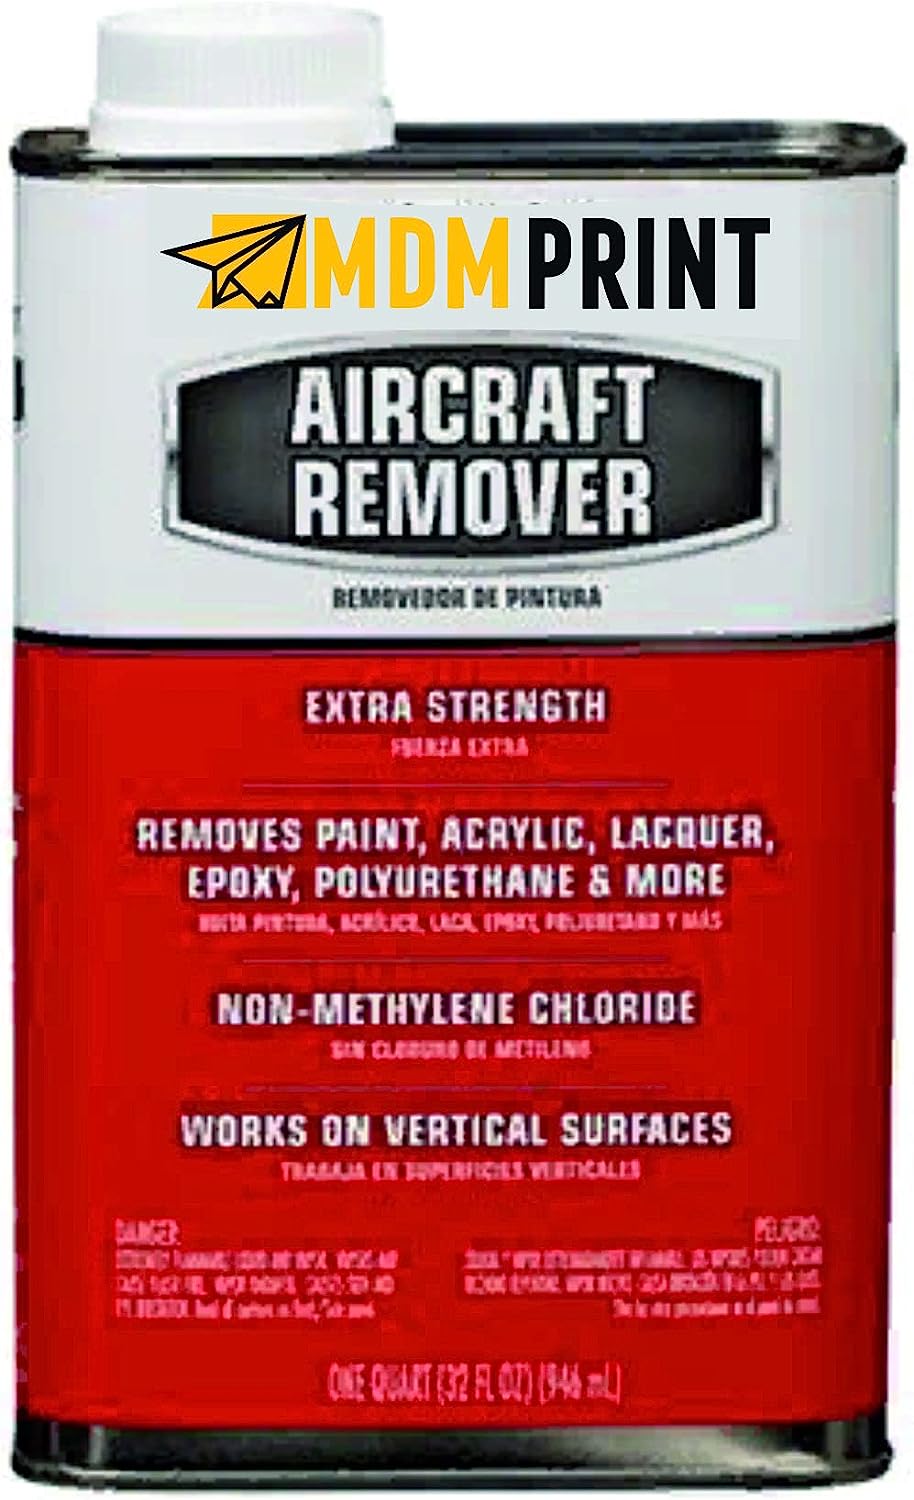 Aircraft Remover 323172 (1 guart) Removes Paint, [...]